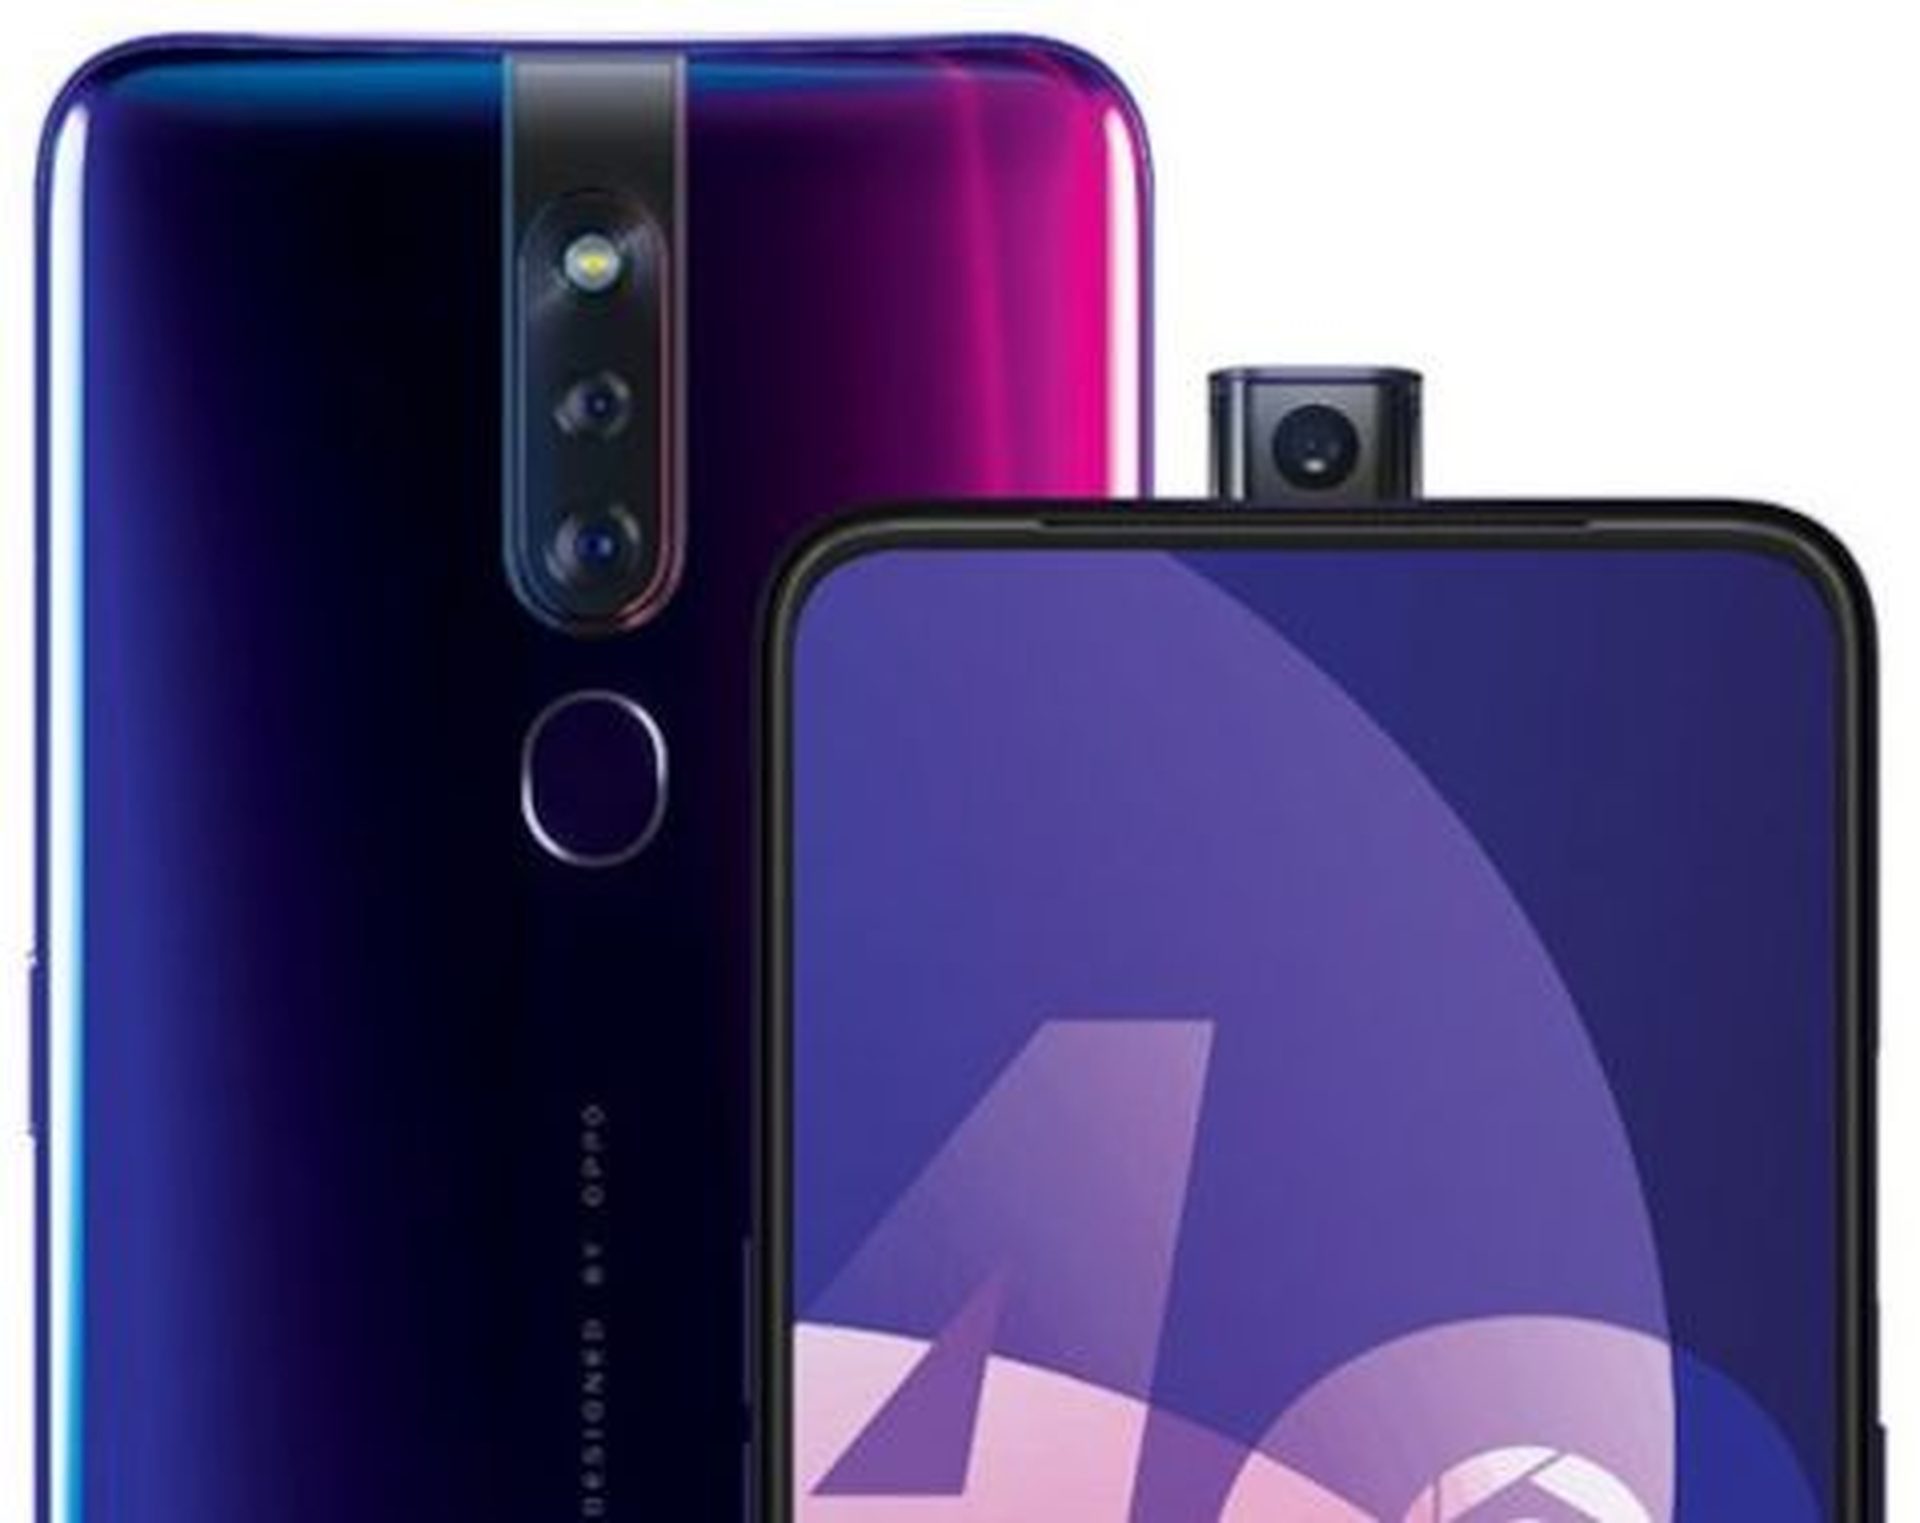 OPPO F11 PRO front camera not working: How to fix it?